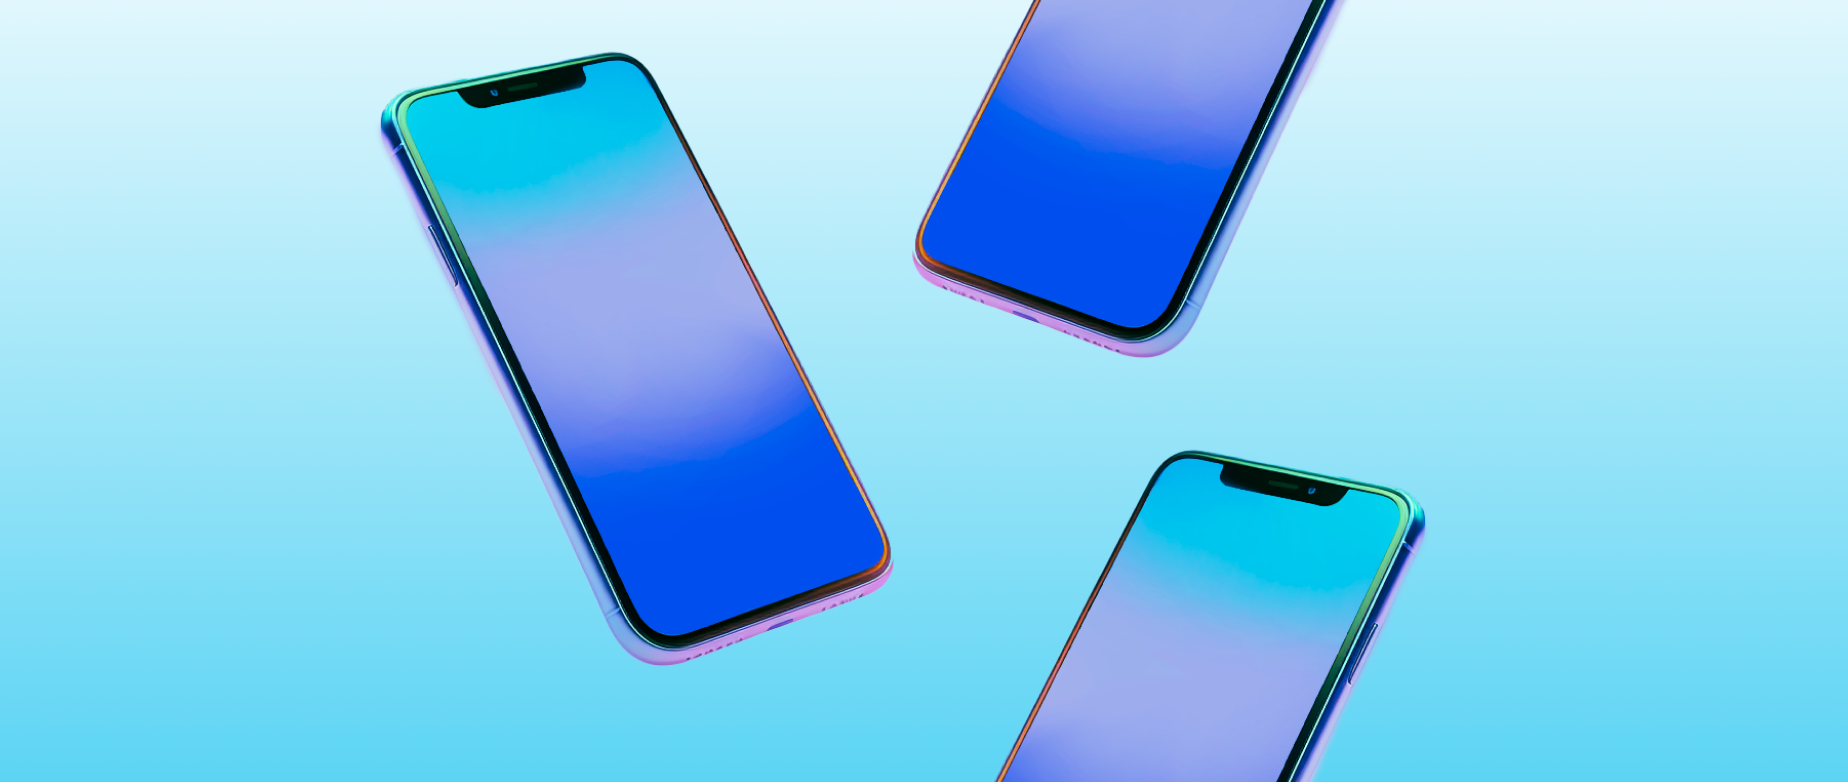 Three phones with multicolored blue screens falling against a blue background.